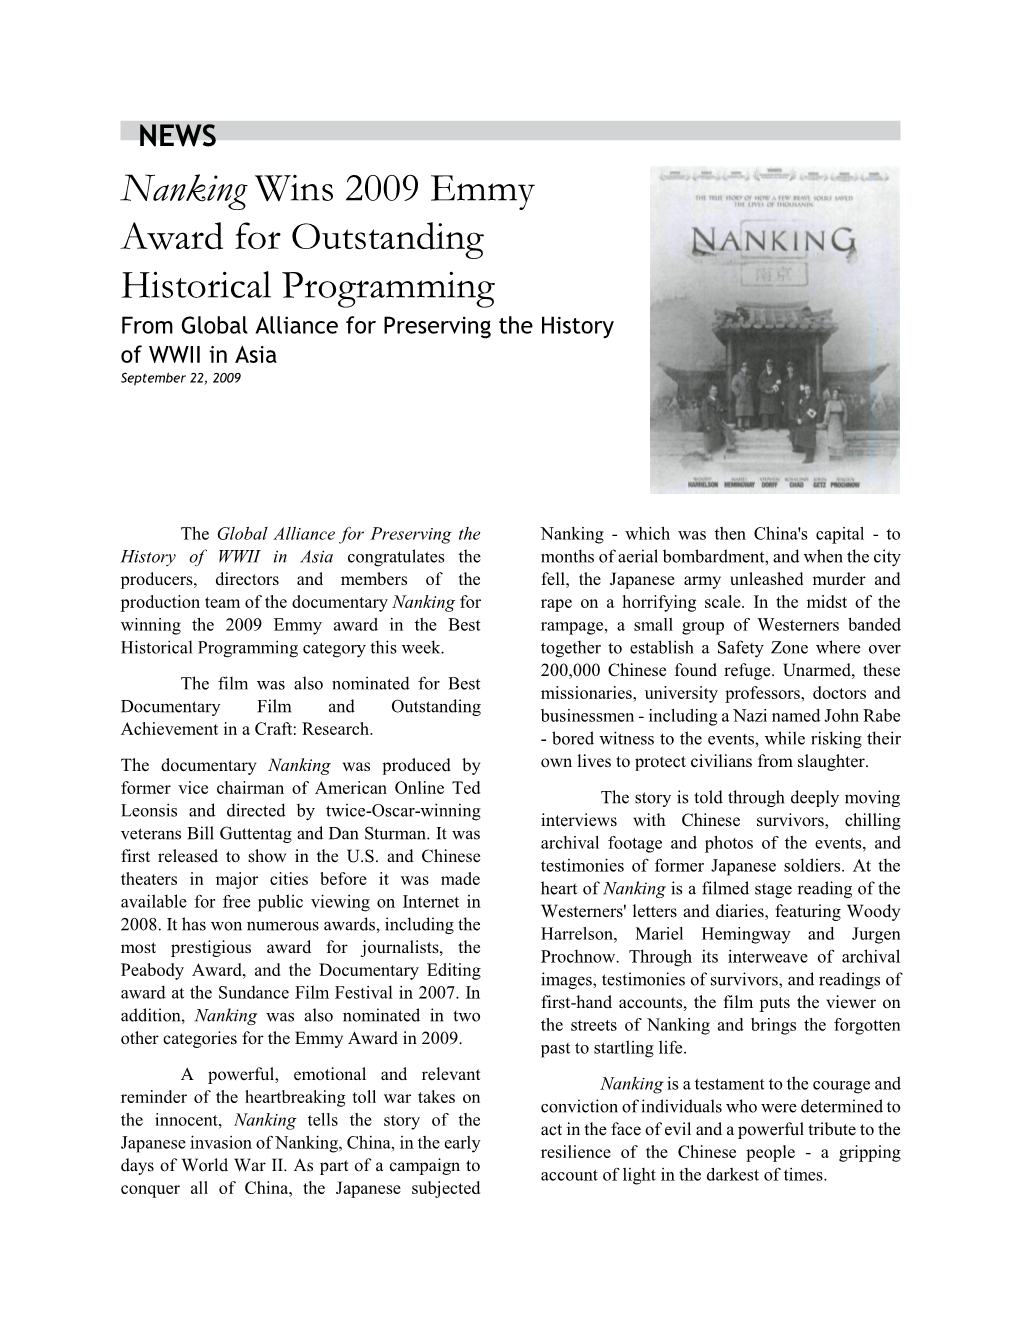 Nanking Wins 2009 Emmy Award for Outstanding Historical Programming from Global Alliance for Preserving the History of WWII in Asia September 22, 2009